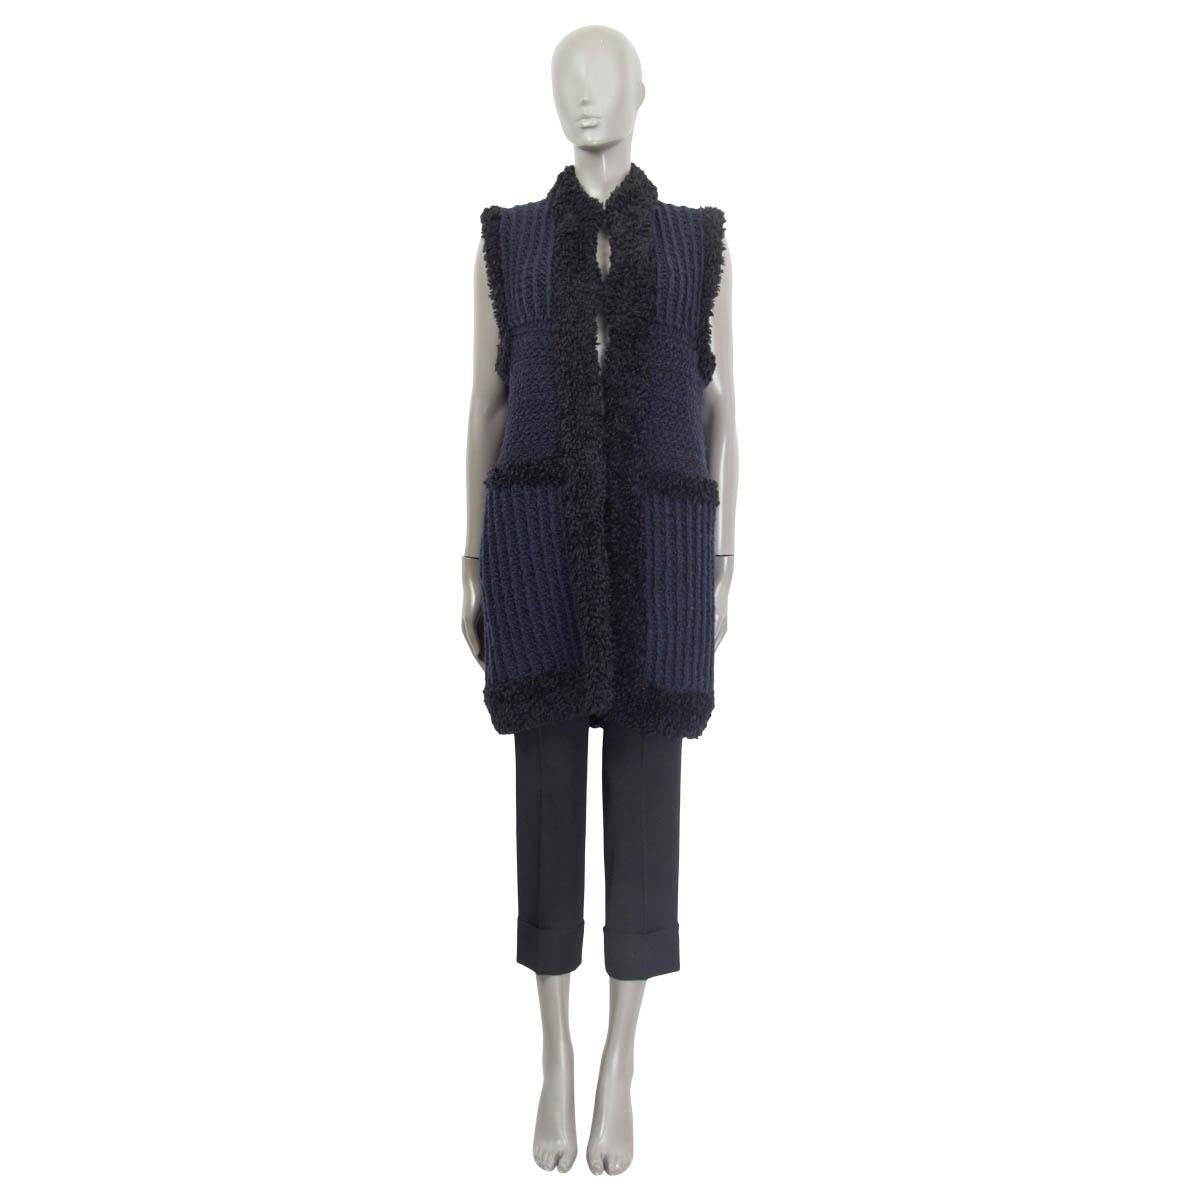 100% authentic Christian Dior sleeveless chunky knit vest in midnight blue and black wool (100%). Opens with four hooks on the front. Unlined. Has been worn and is in excellent condition. 

Measurements
Tag Size	38
Size	S
Shoulder Width	39cm